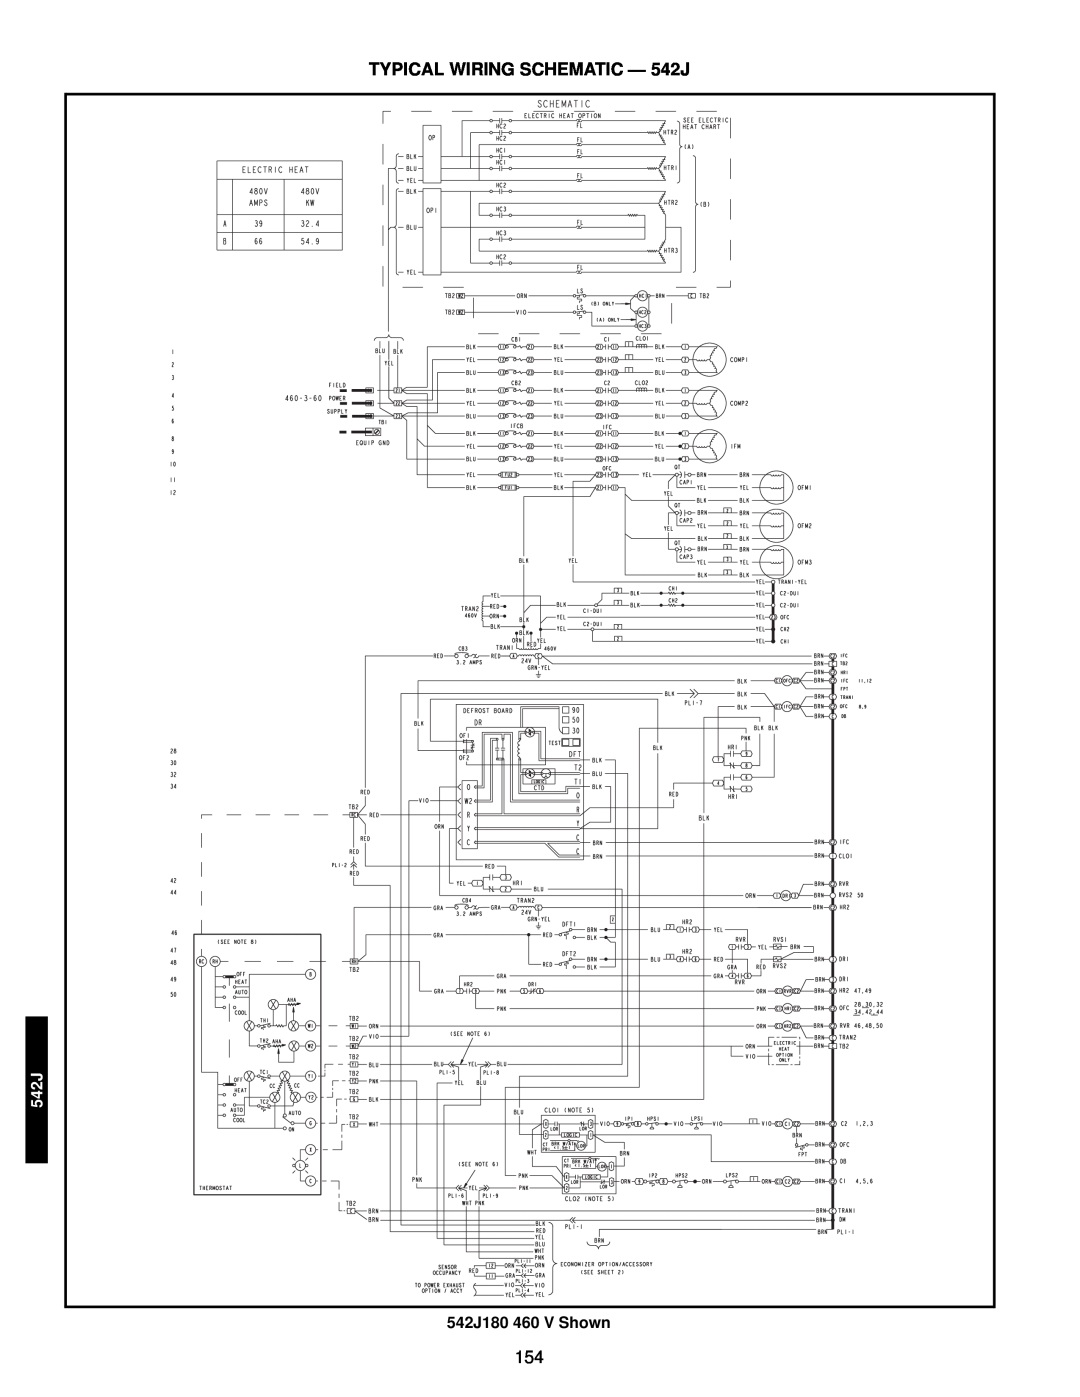 Bryant 549C manual TYPICAL WIRING SCHEMATIC — 542J, 542J180 460 V Shown, a50-7581 